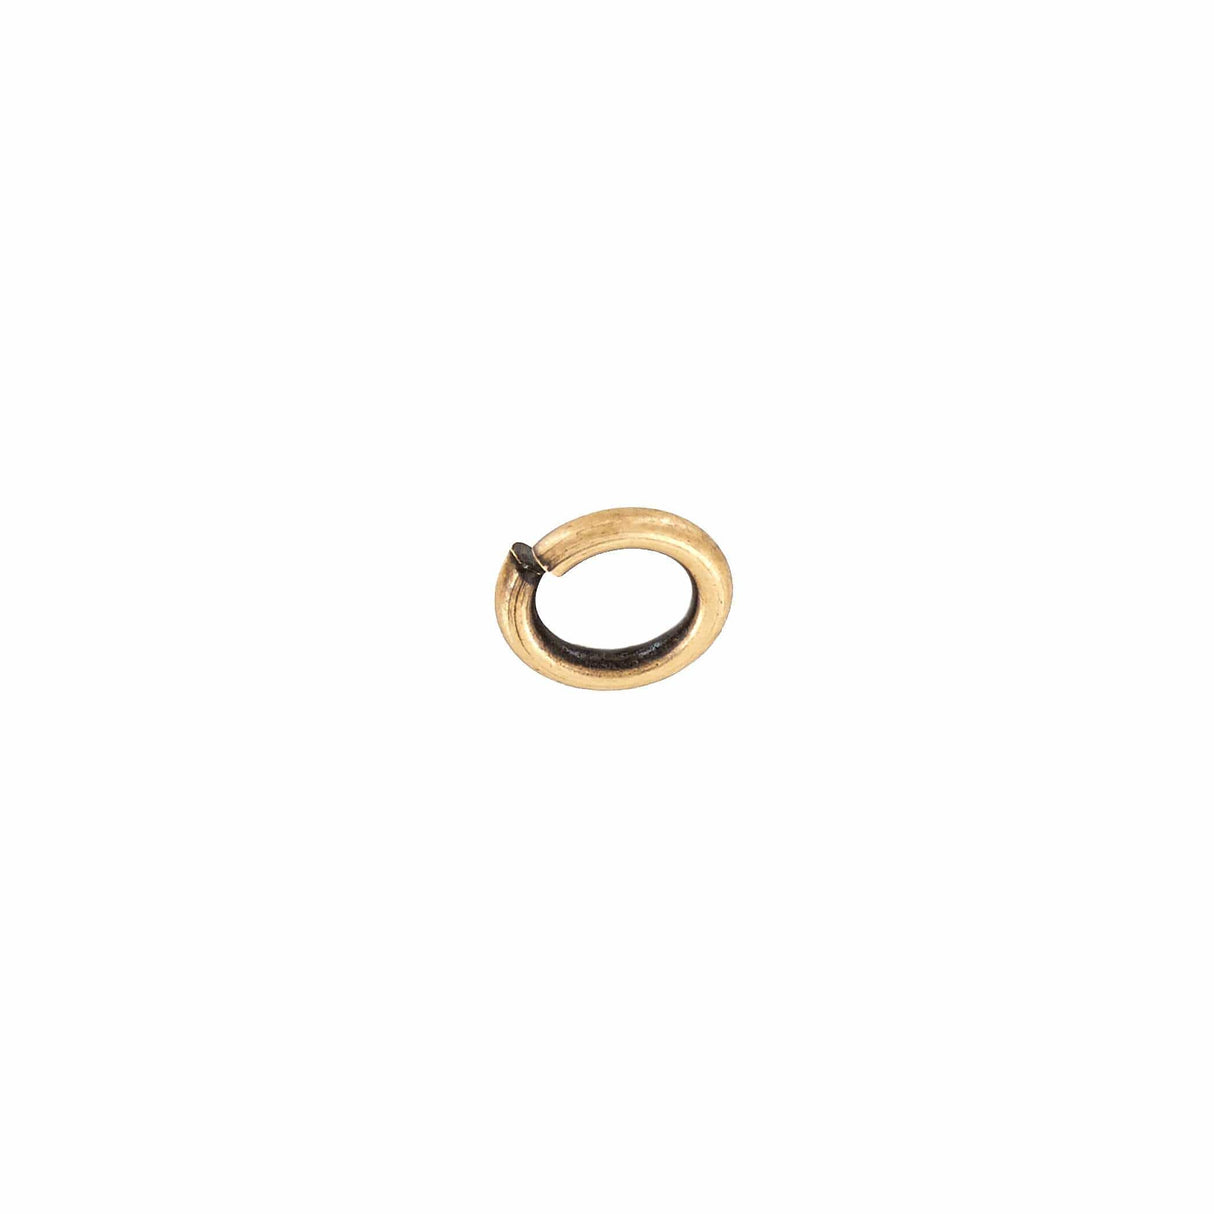 Ohio Travel Bag 1/4" Brass Oxide, Split Round Jump Ring, Solid Brass, #P-3244-BRS-OX P-3244-BRS-OX